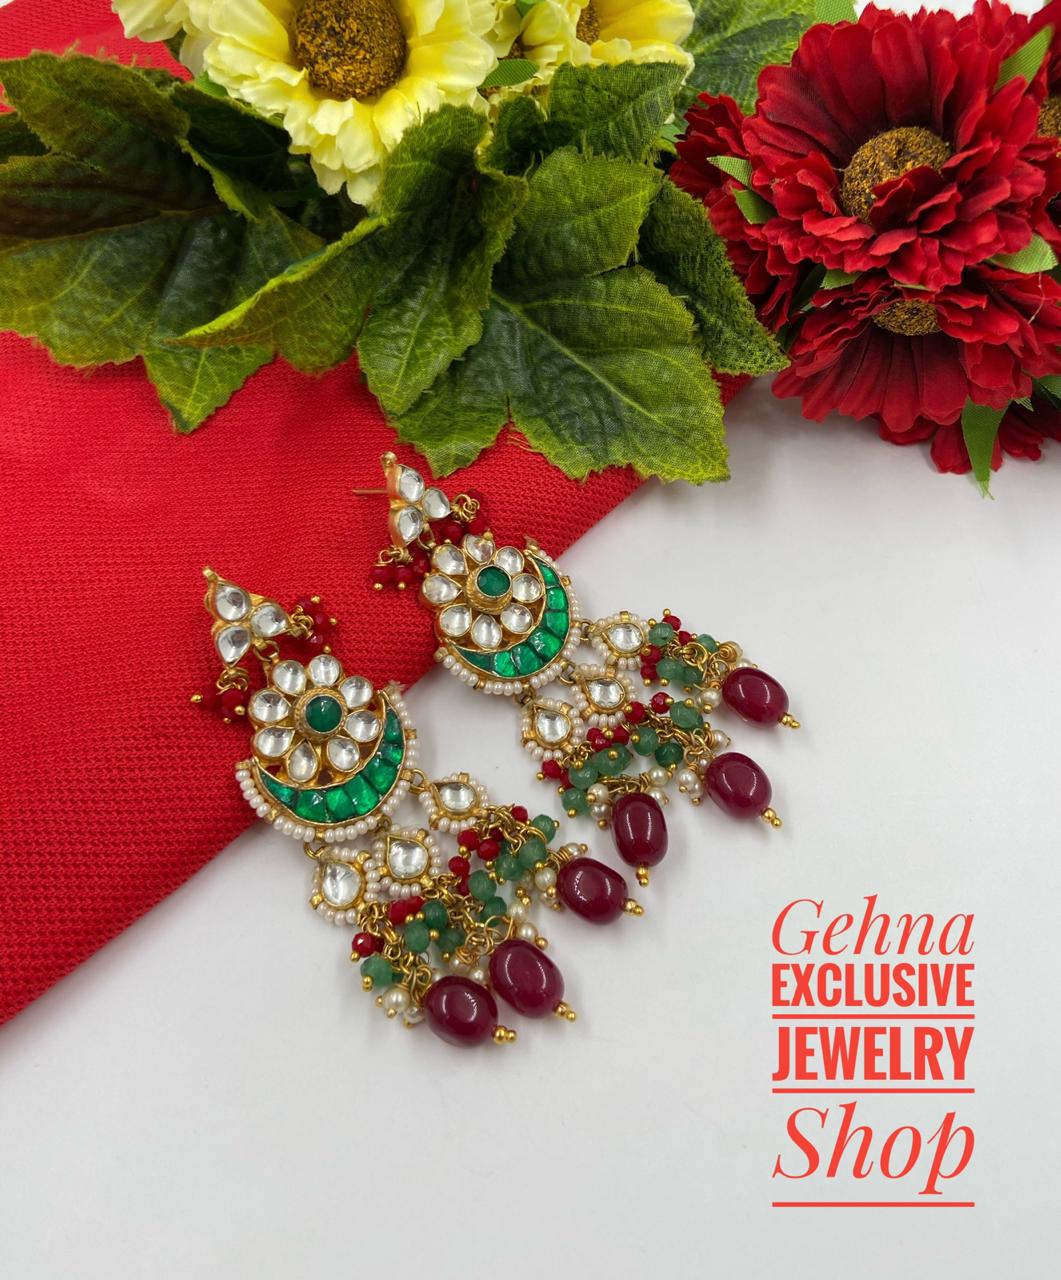 Majestic Red Crystal Chatai Choker For Ladies By Gehna Shop Choker Necklace Set